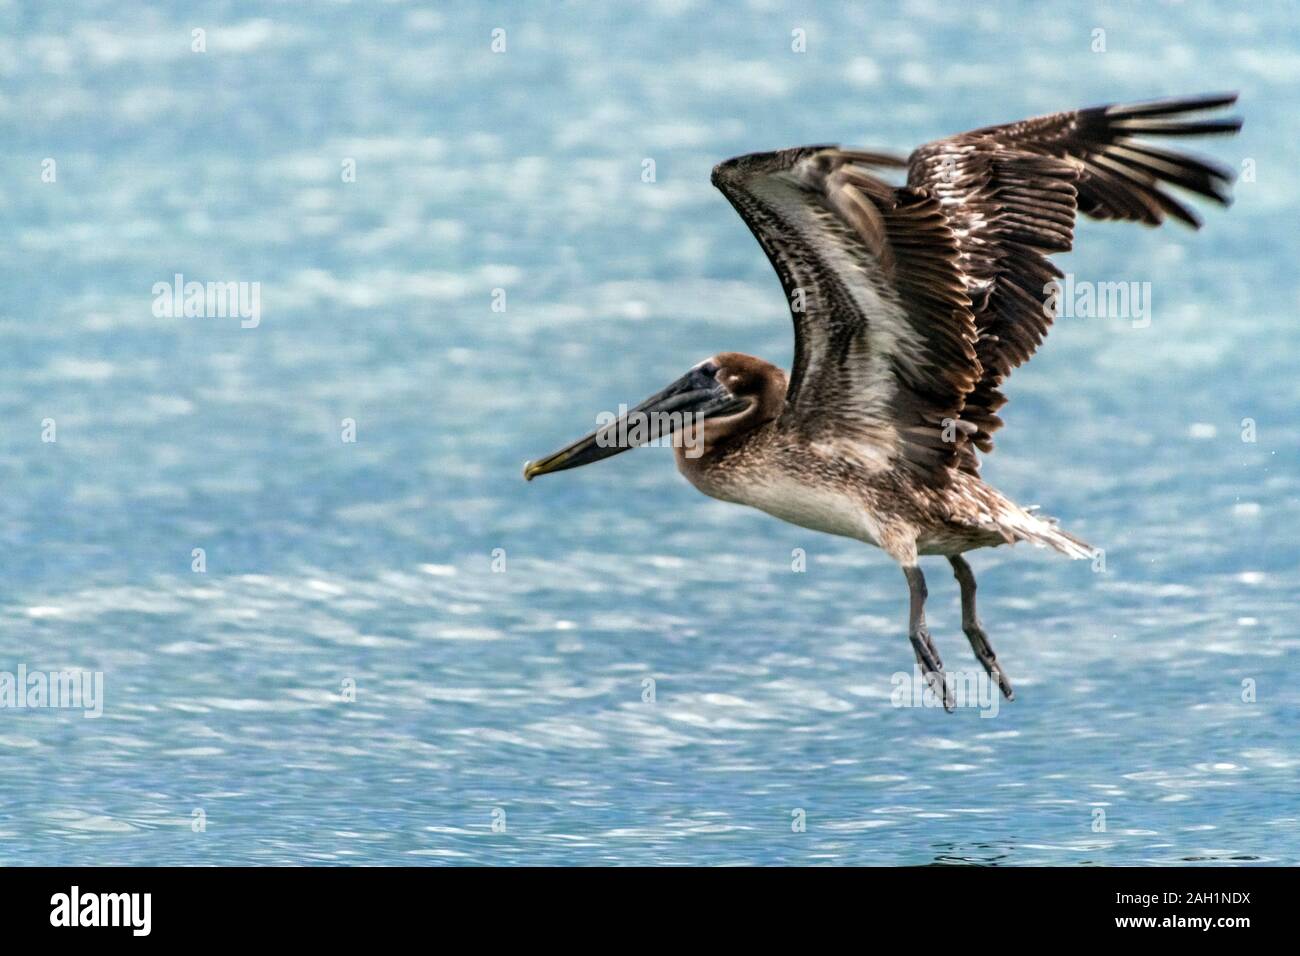 Pelican flying low above water surface Stock Photo